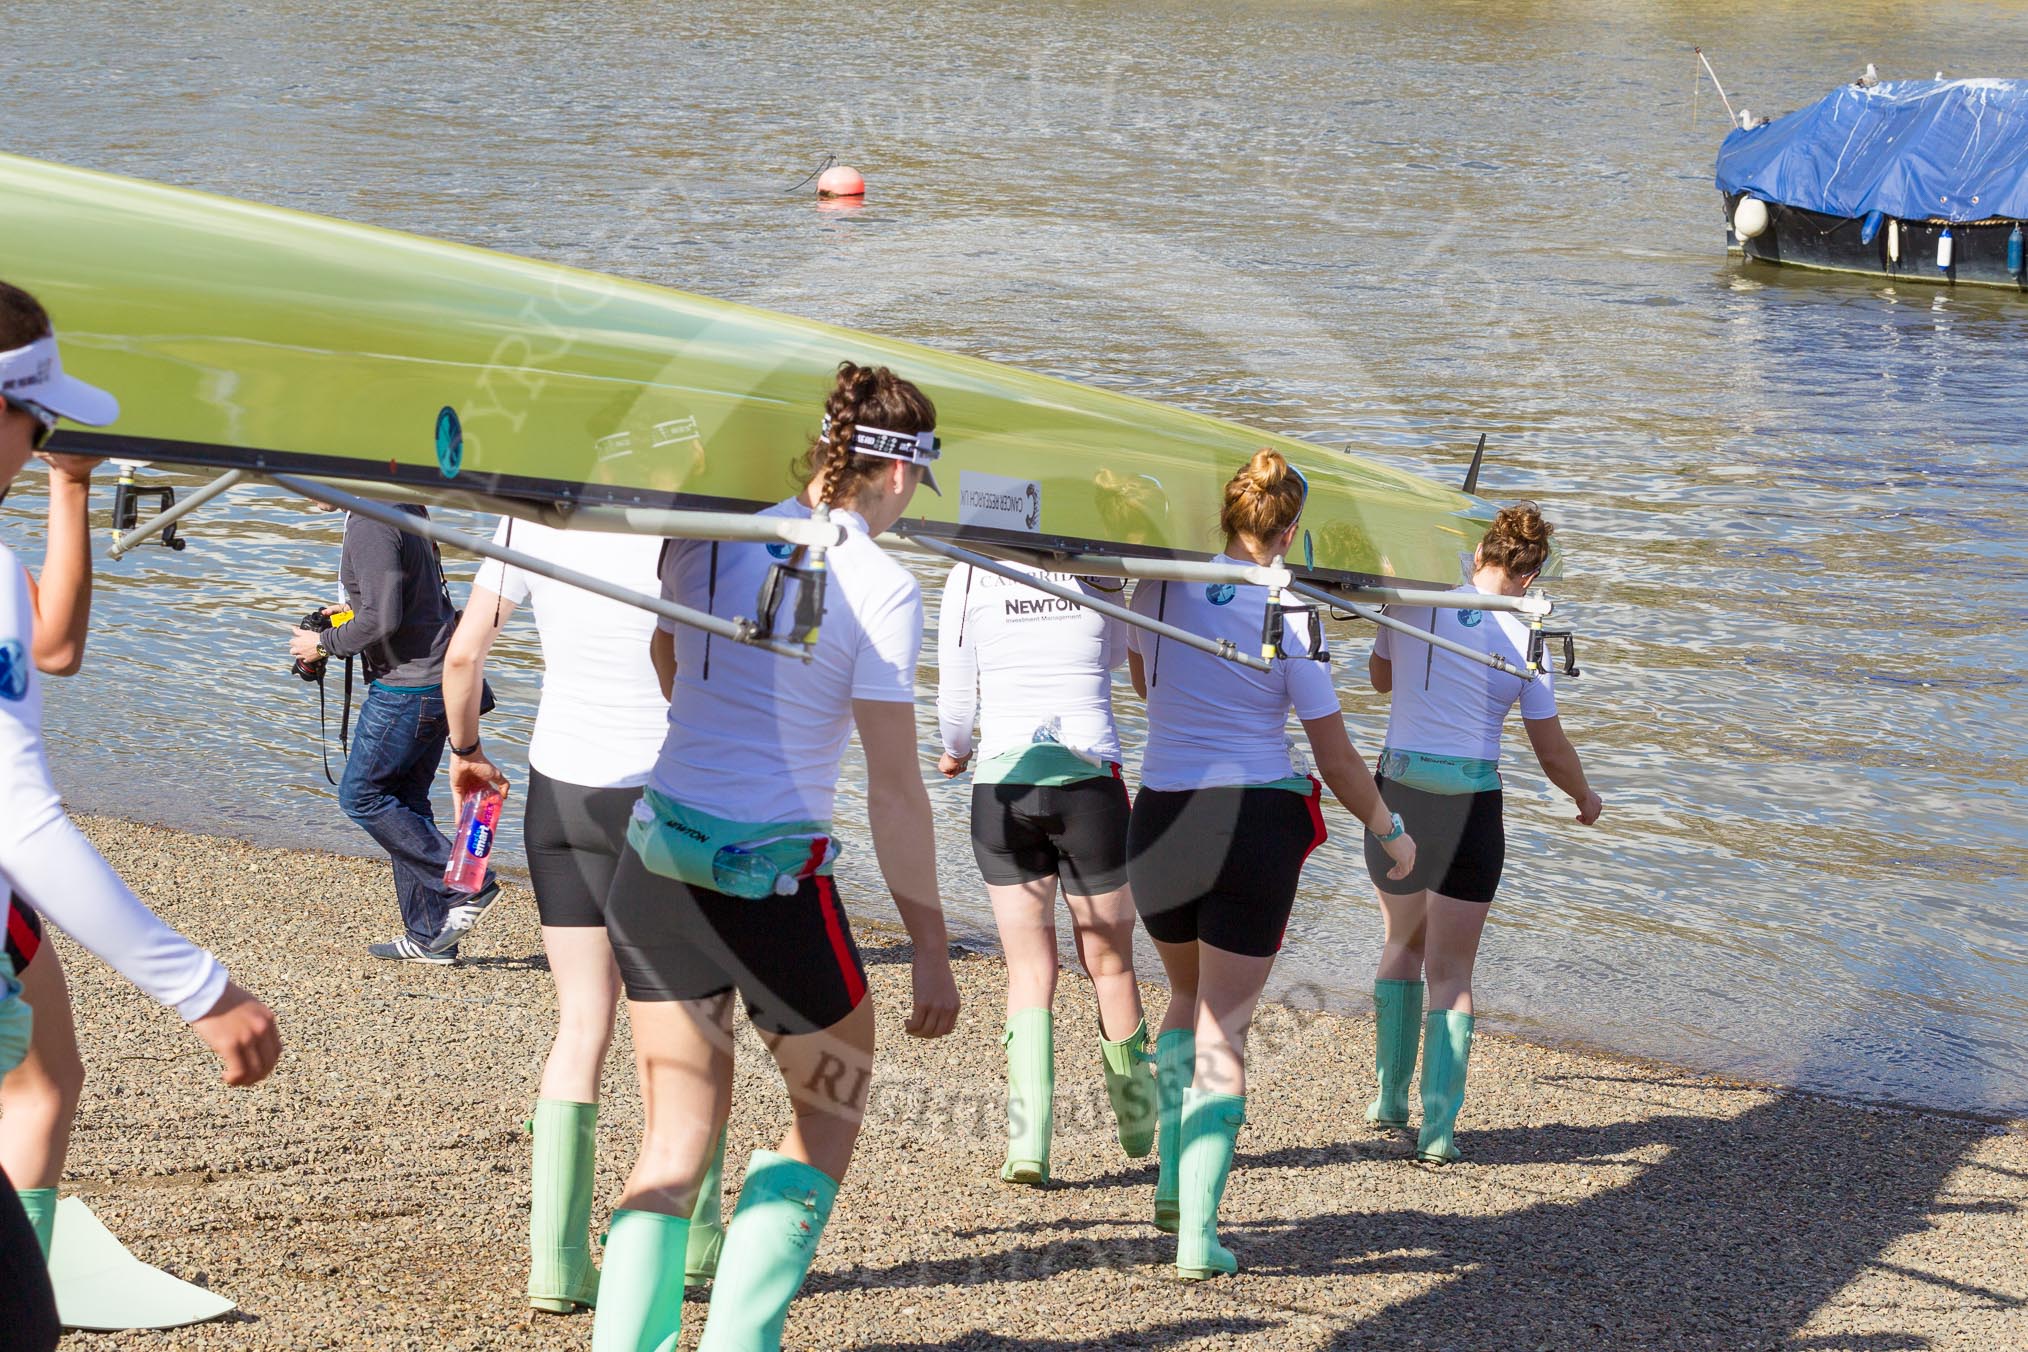 The Boat Race season 2017 -  The Cancer Research Women's Boat Race: CUWBC carrying the Cambridge boat from the boat house to the river.
River Thames between Putney Bridge and Mortlake,
London SW15,

United Kingdom,
on 02 April 2017 at 15:47, image #58